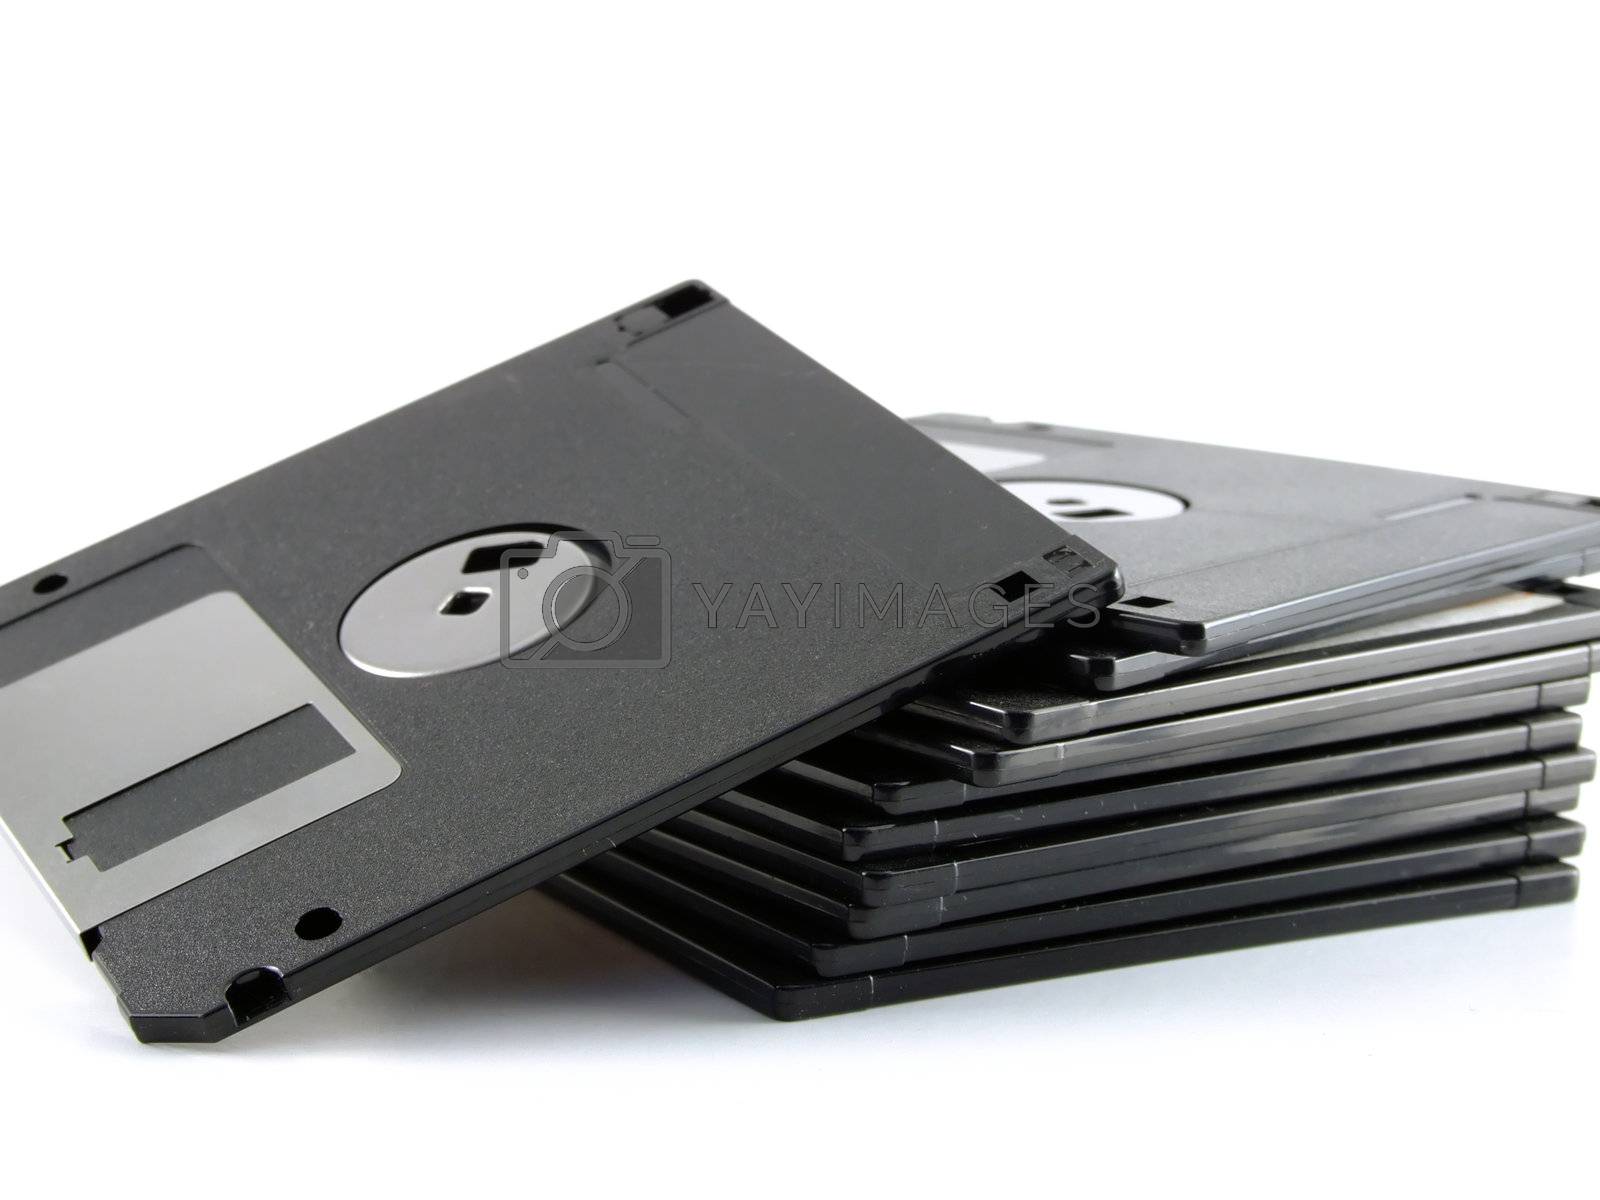 Royalty free image of Old floppy disk by PauloResende